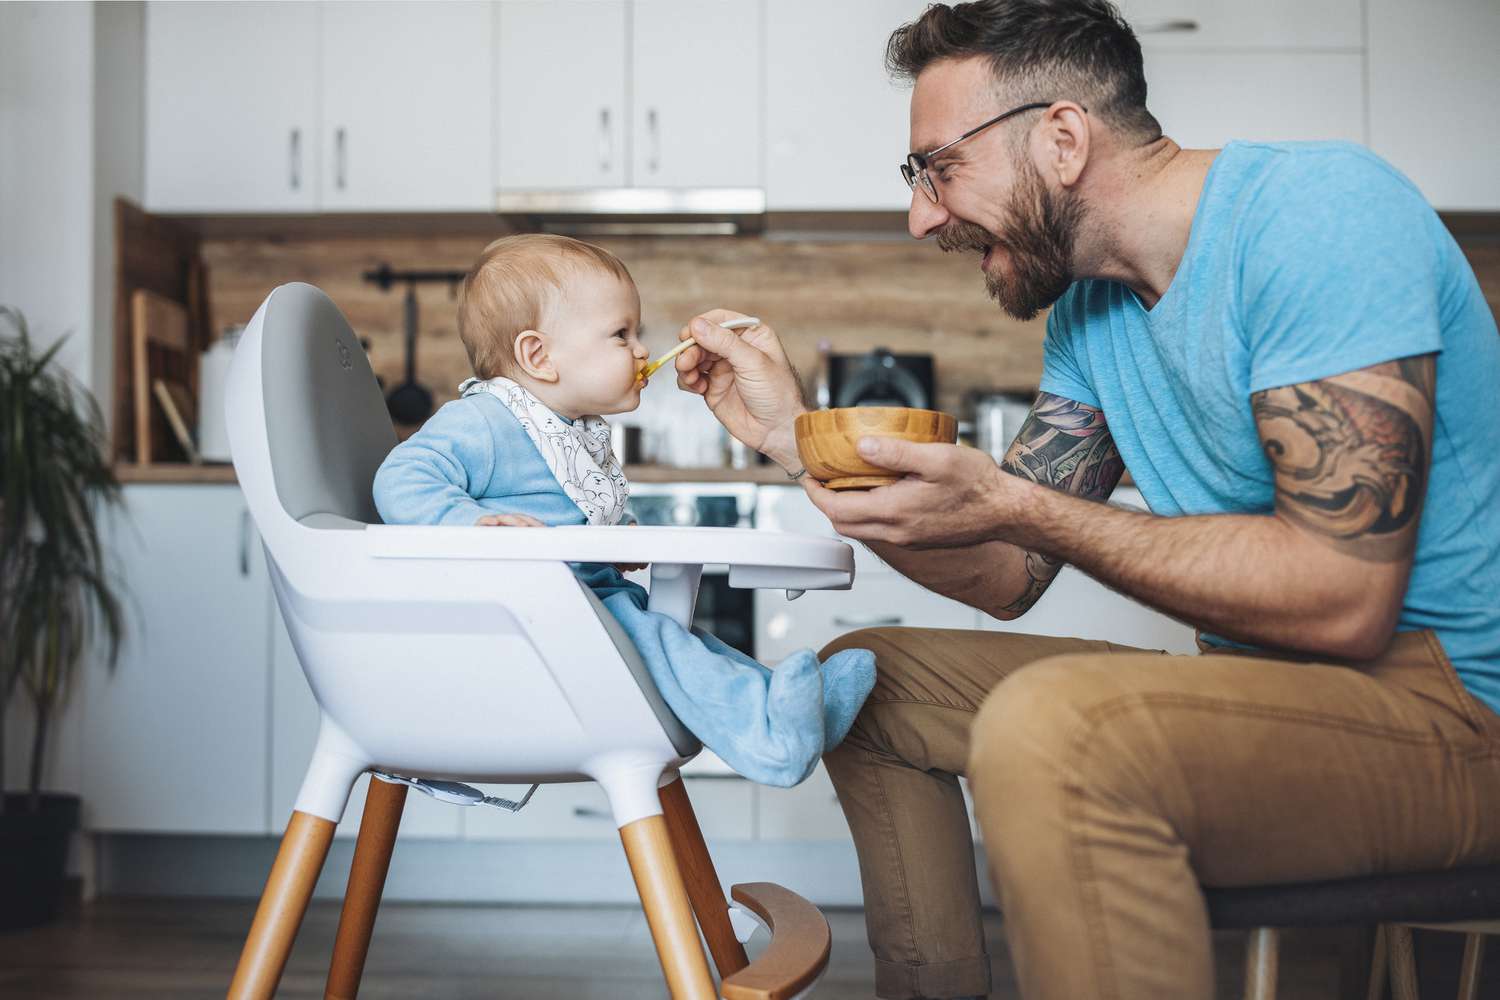 When Do Babies Sit In A High Chair?